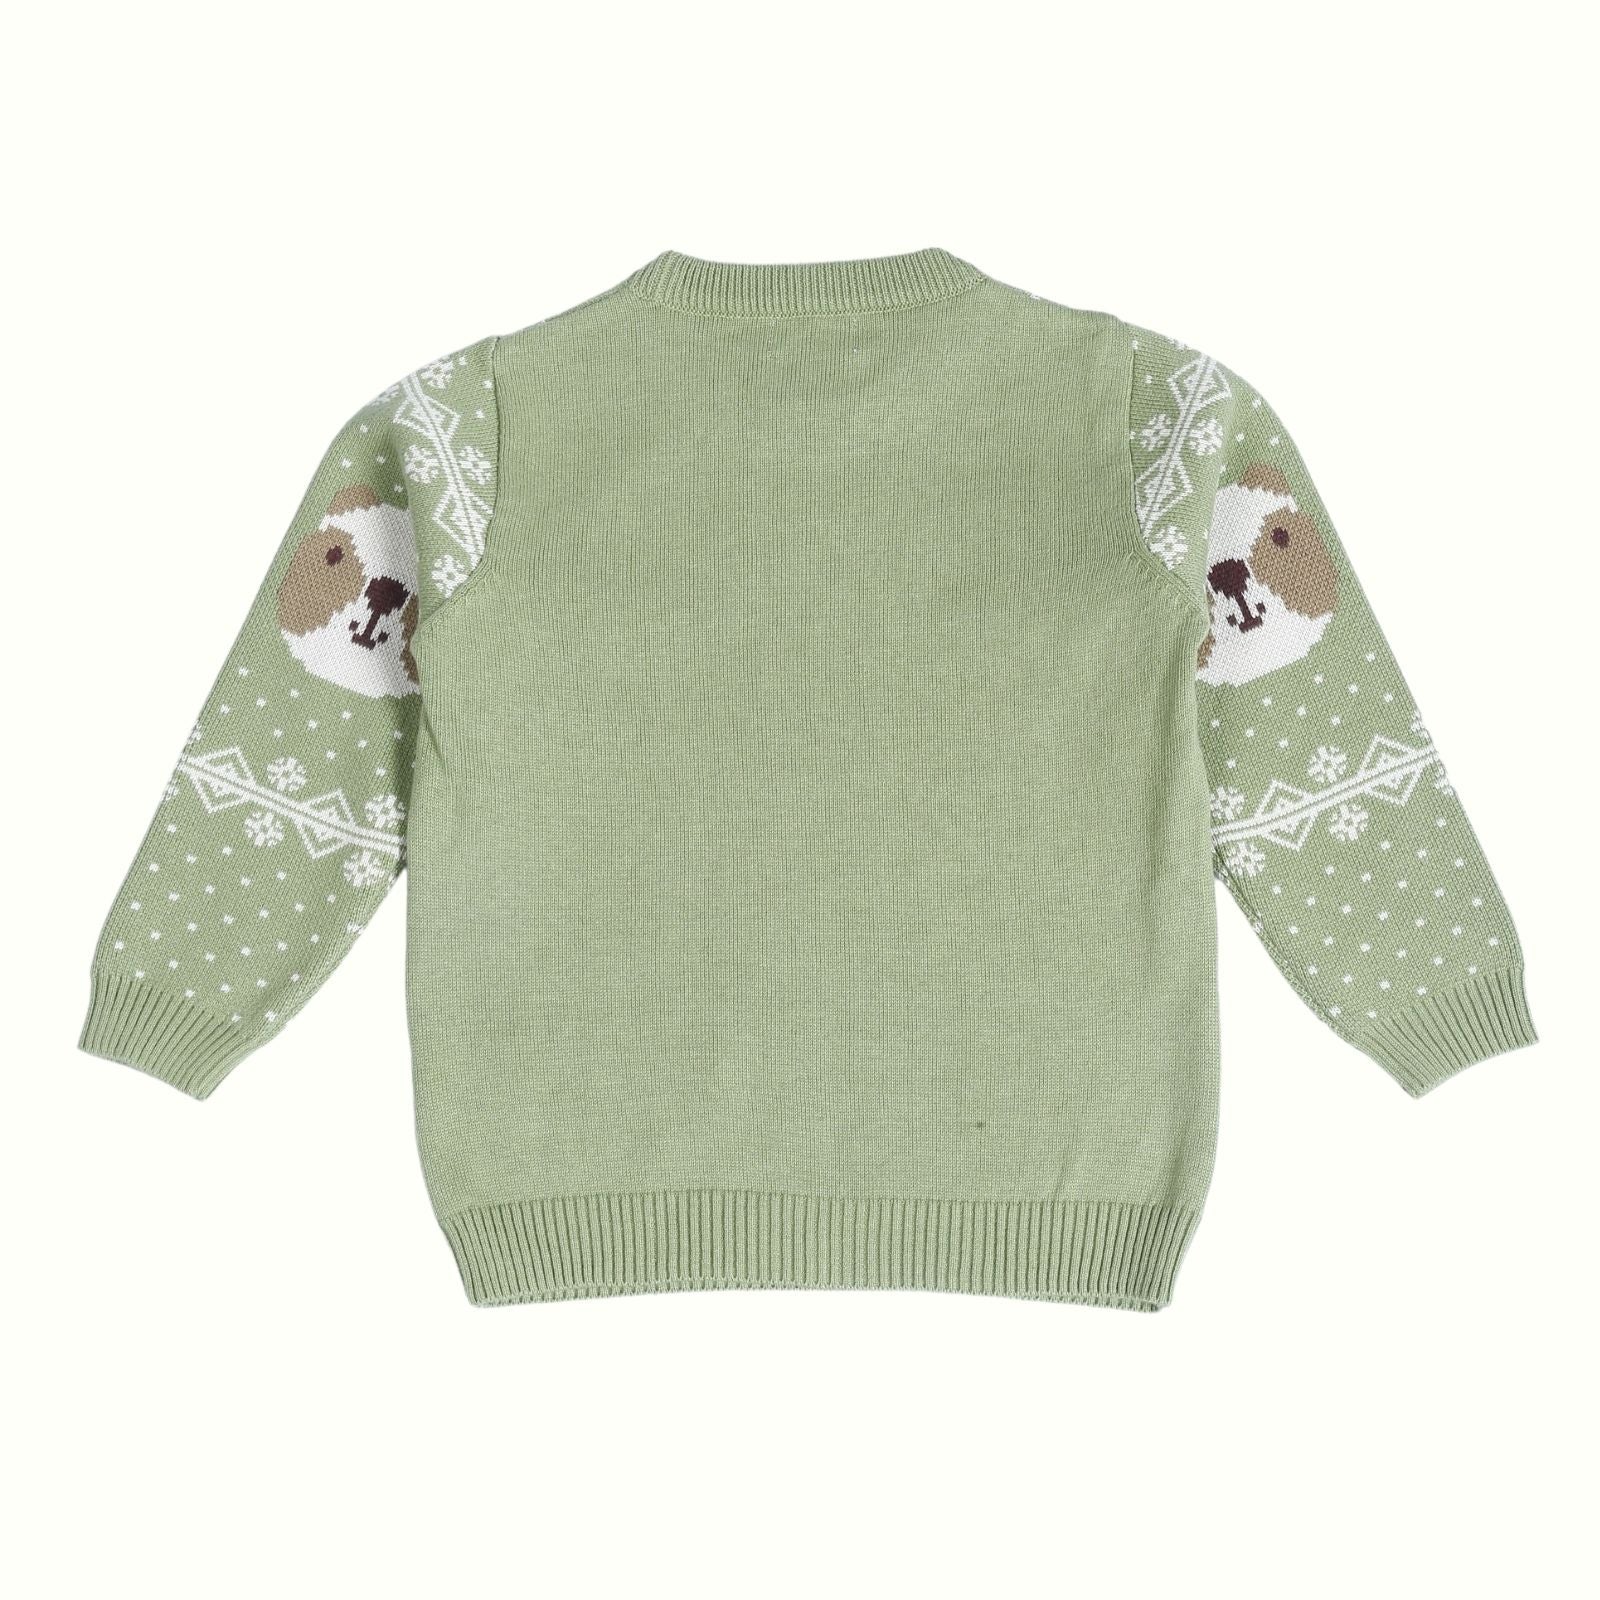 Greendeer Cheerful Dog & Enchanting Bear 100% Cotton Sweater with Lower Set of 4